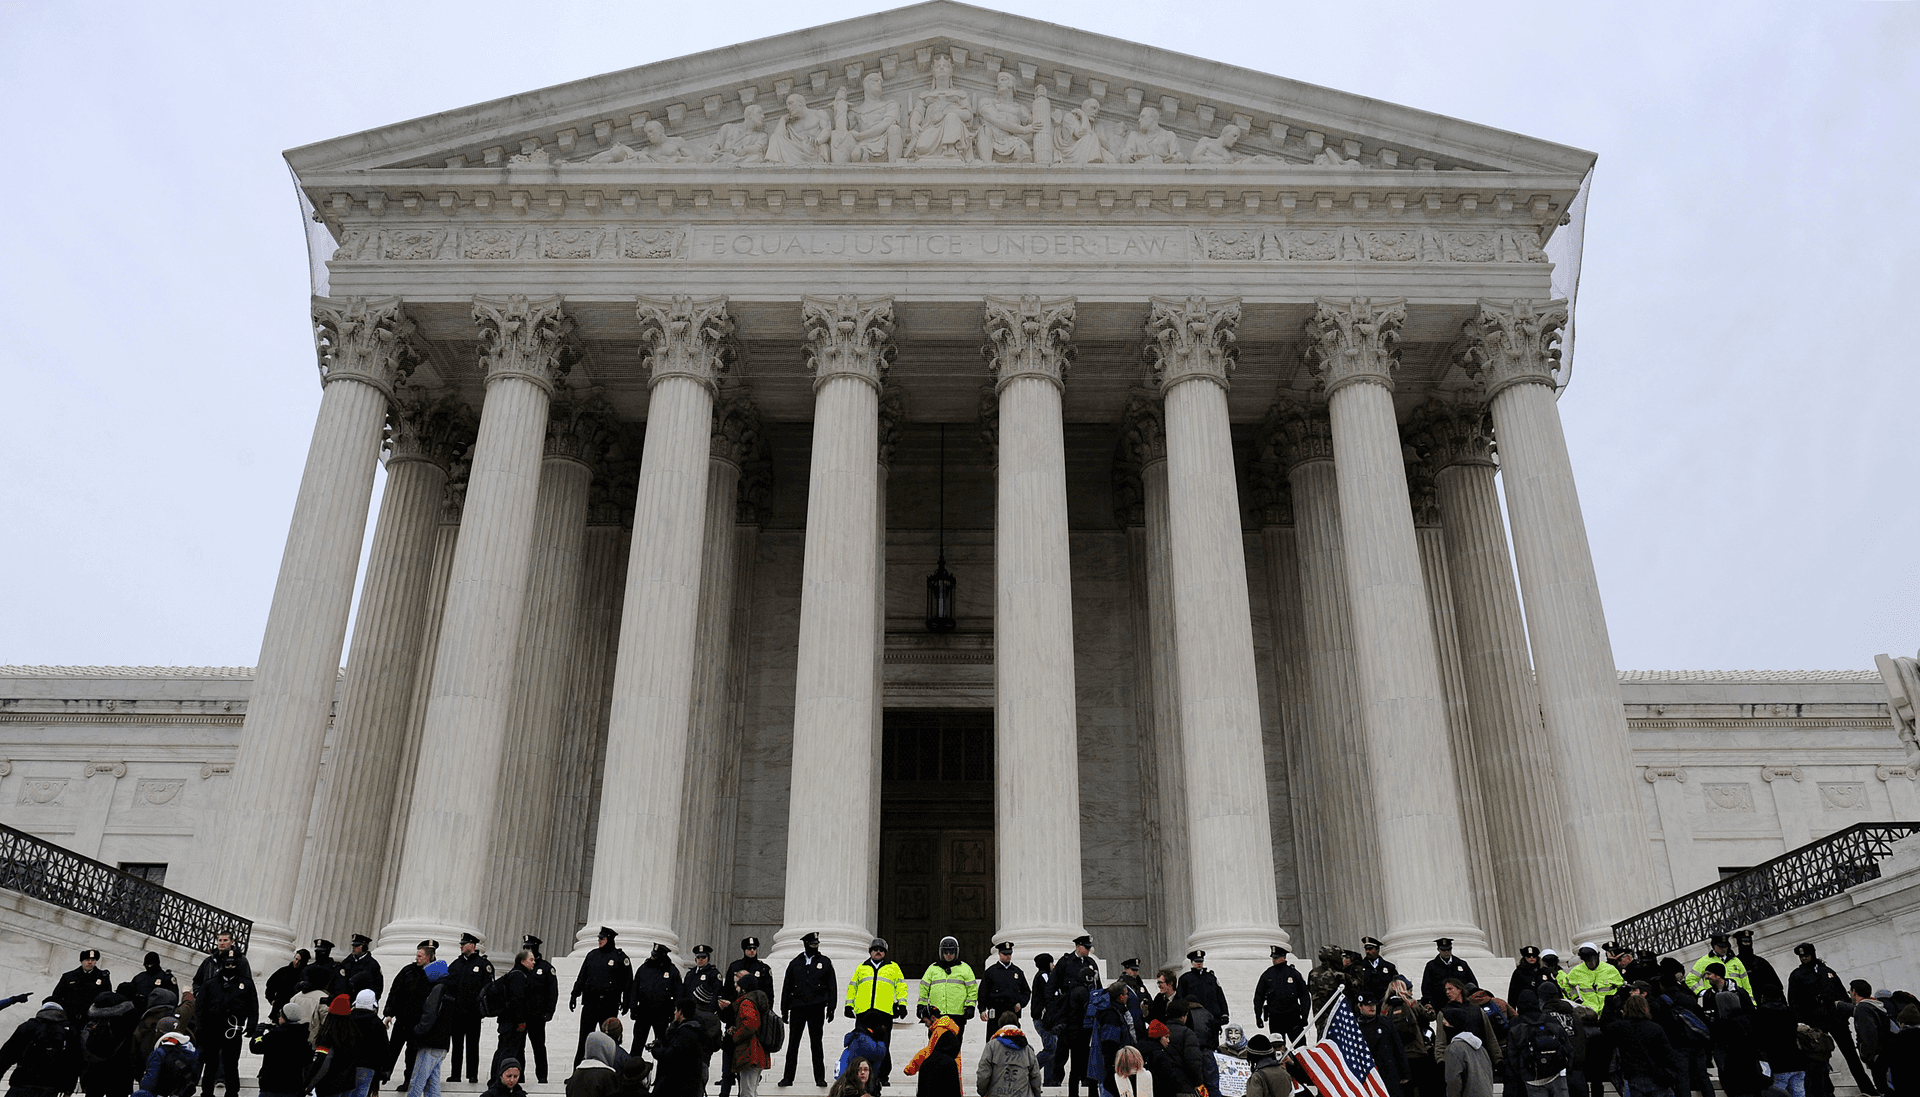 Demonstrators on the steps of the U.S. Supreme Court building, on the anniversary of the Citizens United decision, in Washington, January 20, 2012.